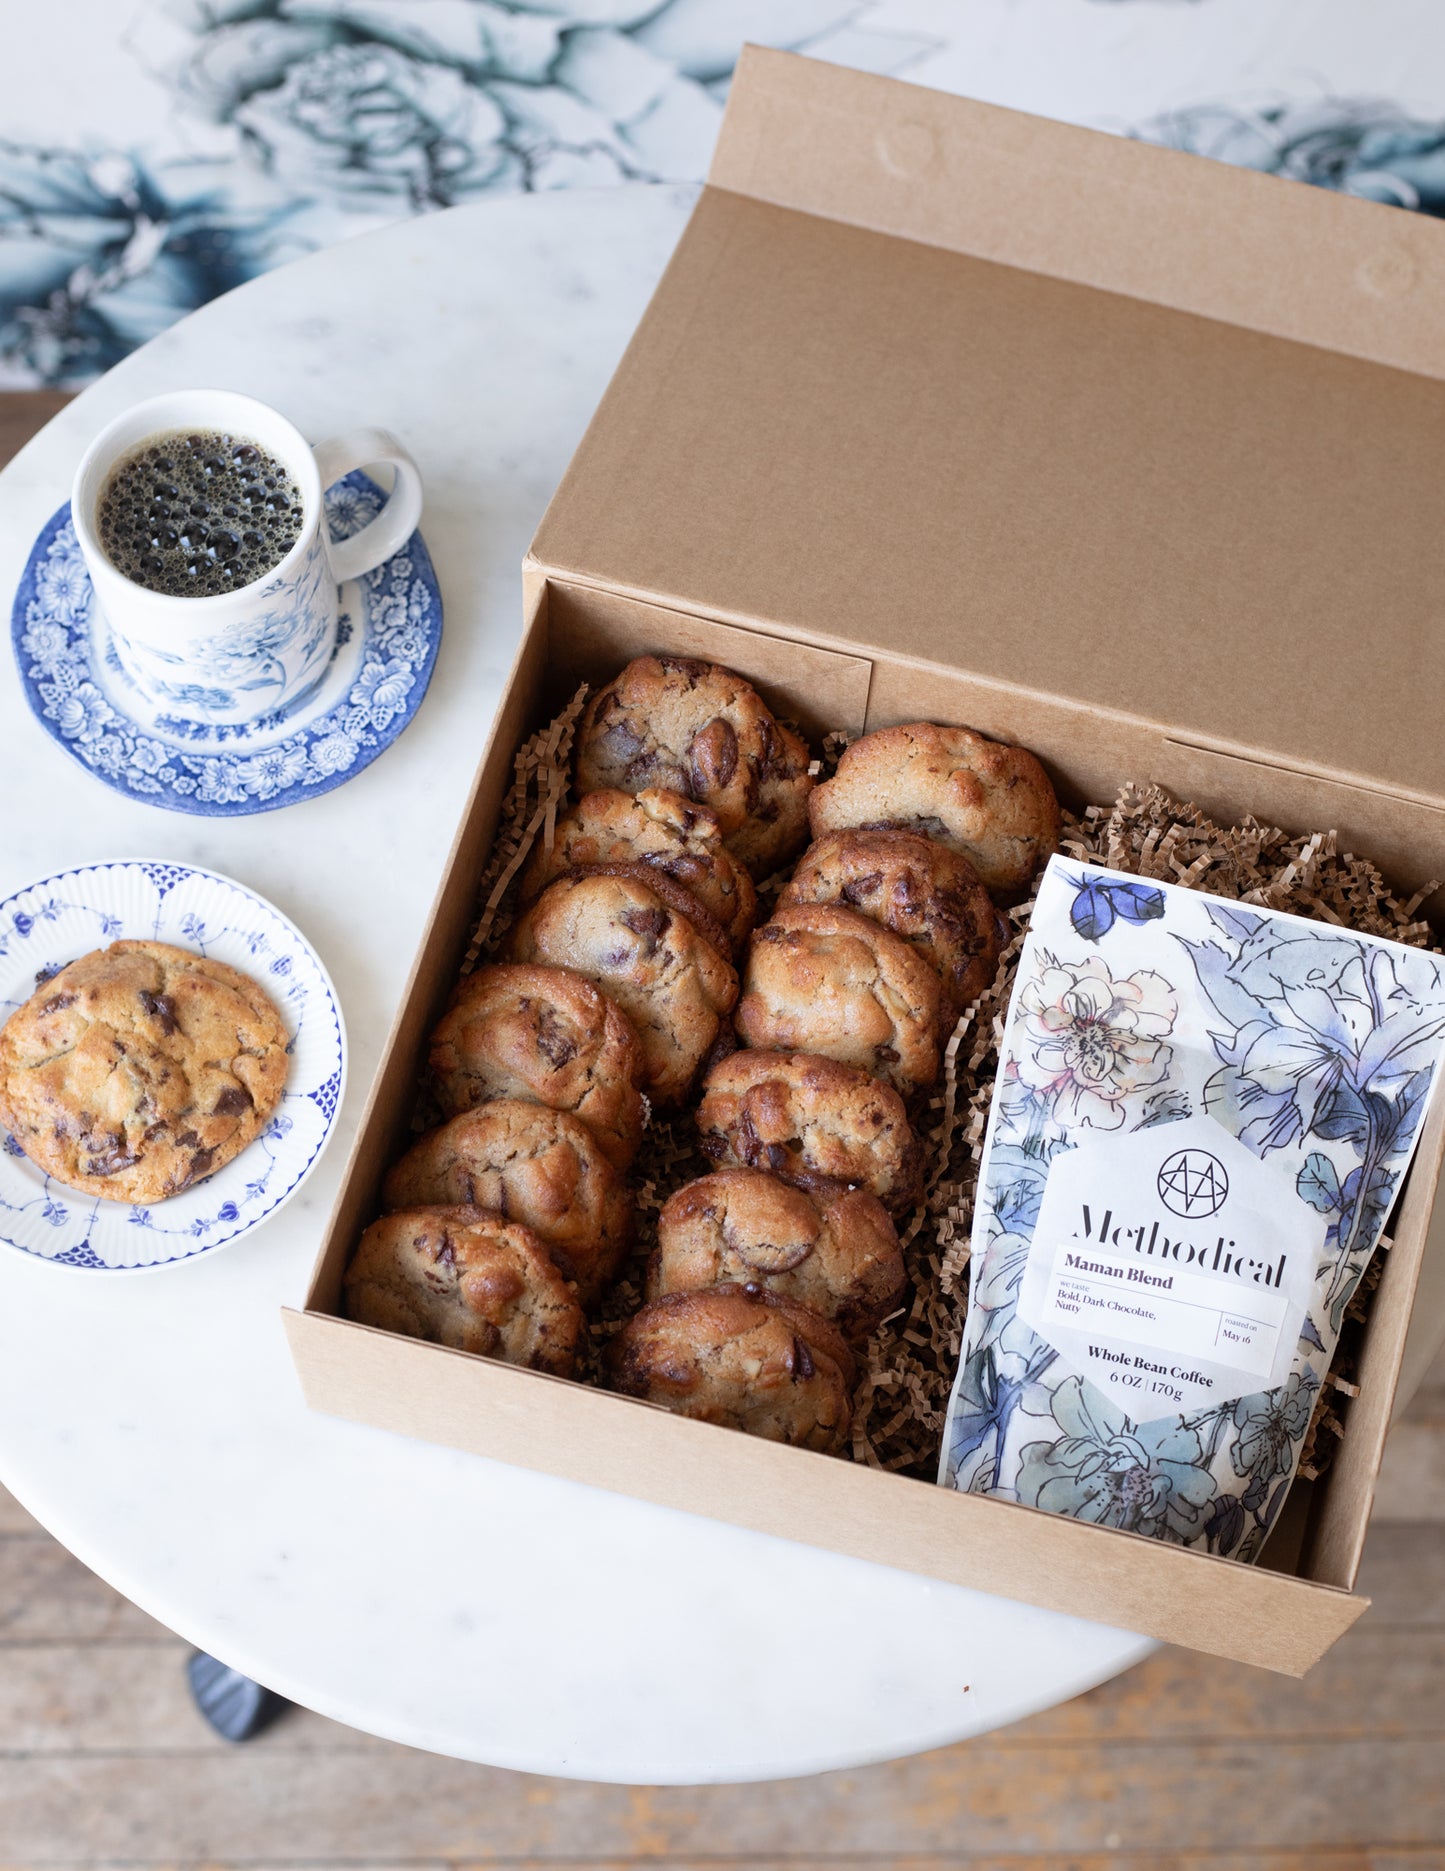 methodical coffee & cookie gift box